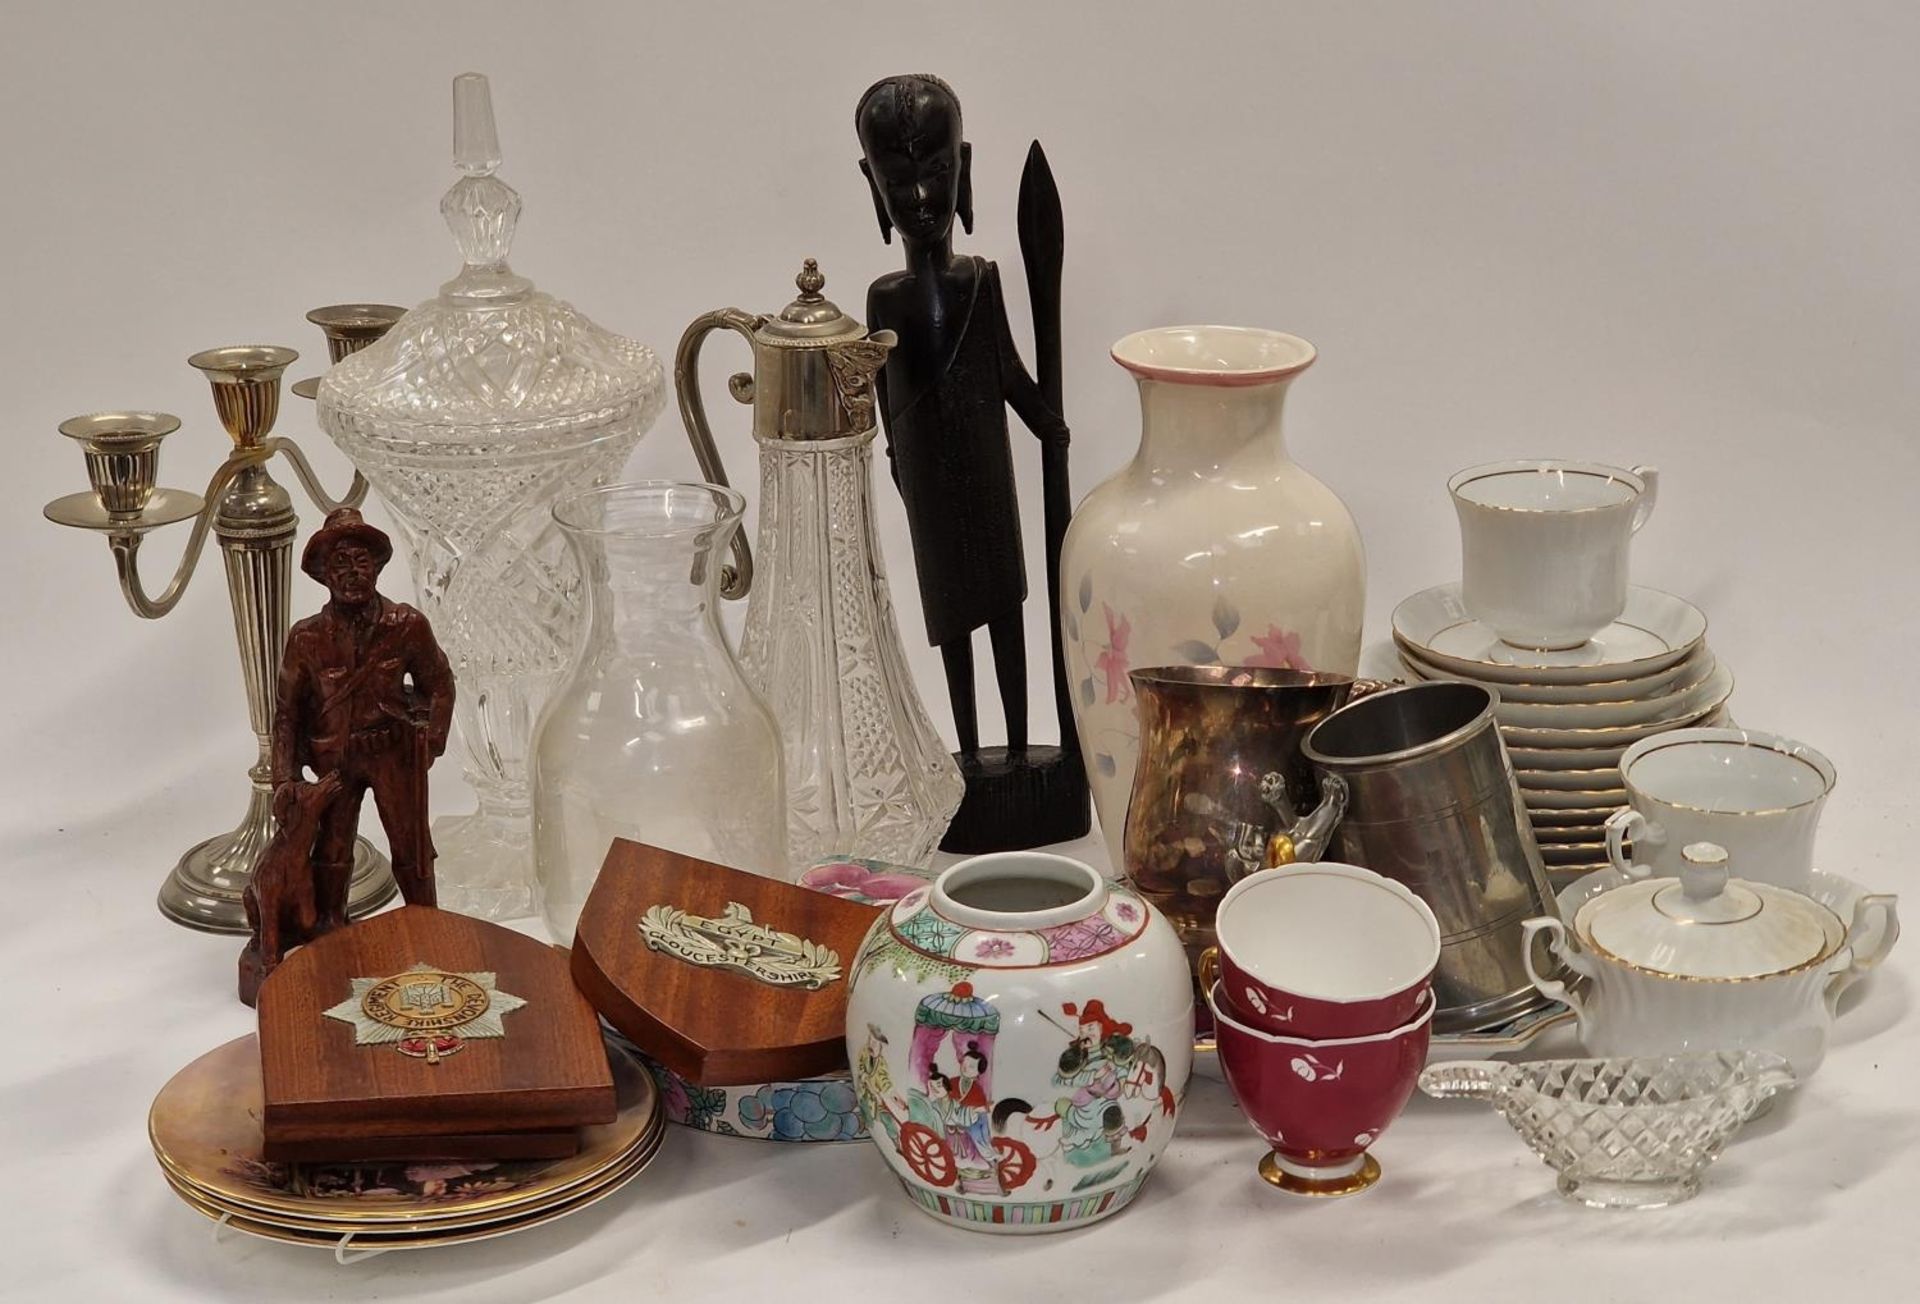 Miscellaneous items to include glassware, china, wooden items etc.